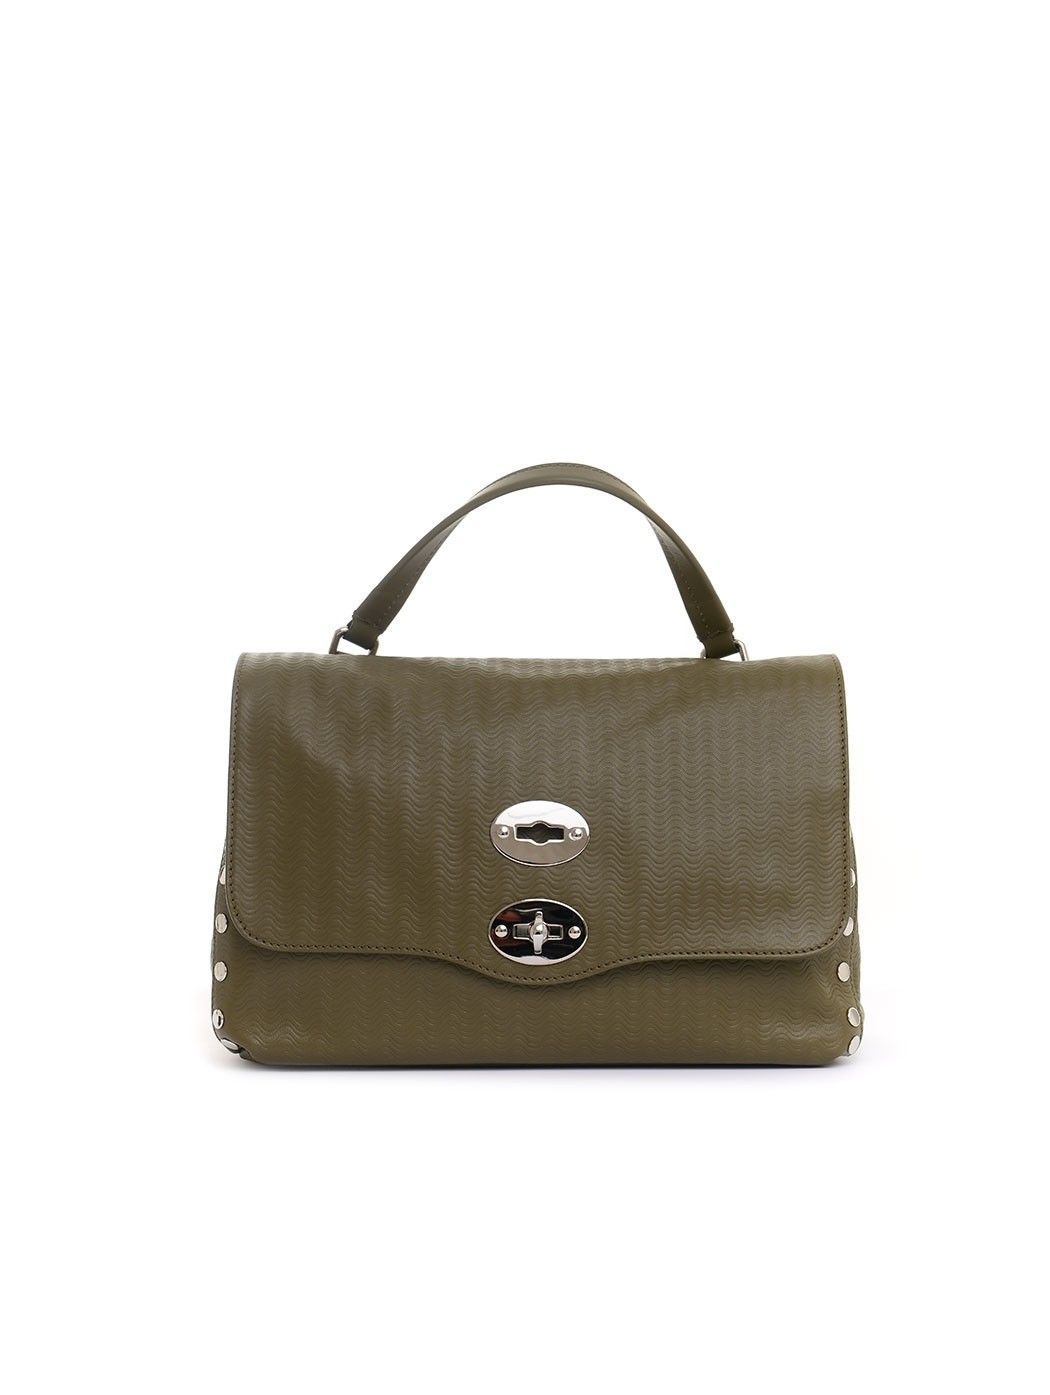  WOMAN BAGS,SPRING SUMMER COLLECTION,GIVENCHY BAGS,MARNI BAGS,LES PETITS JOUEURS BAGS  ZANELLATO 0612060